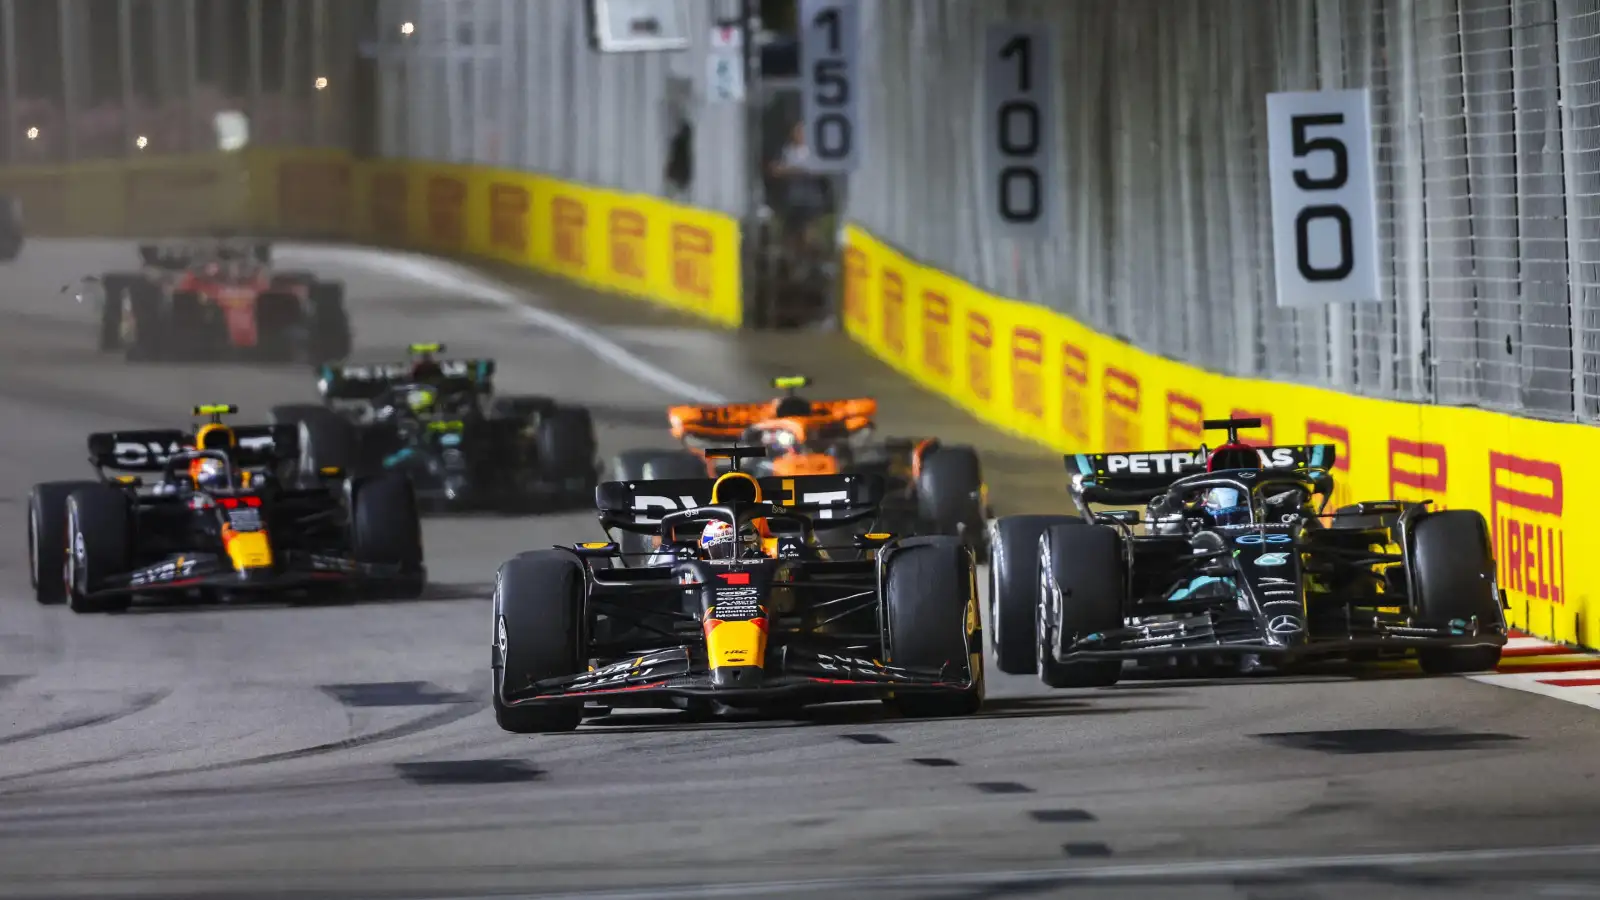 Red Bull's Max Verstappen in action during the Singapore Grand Prix.